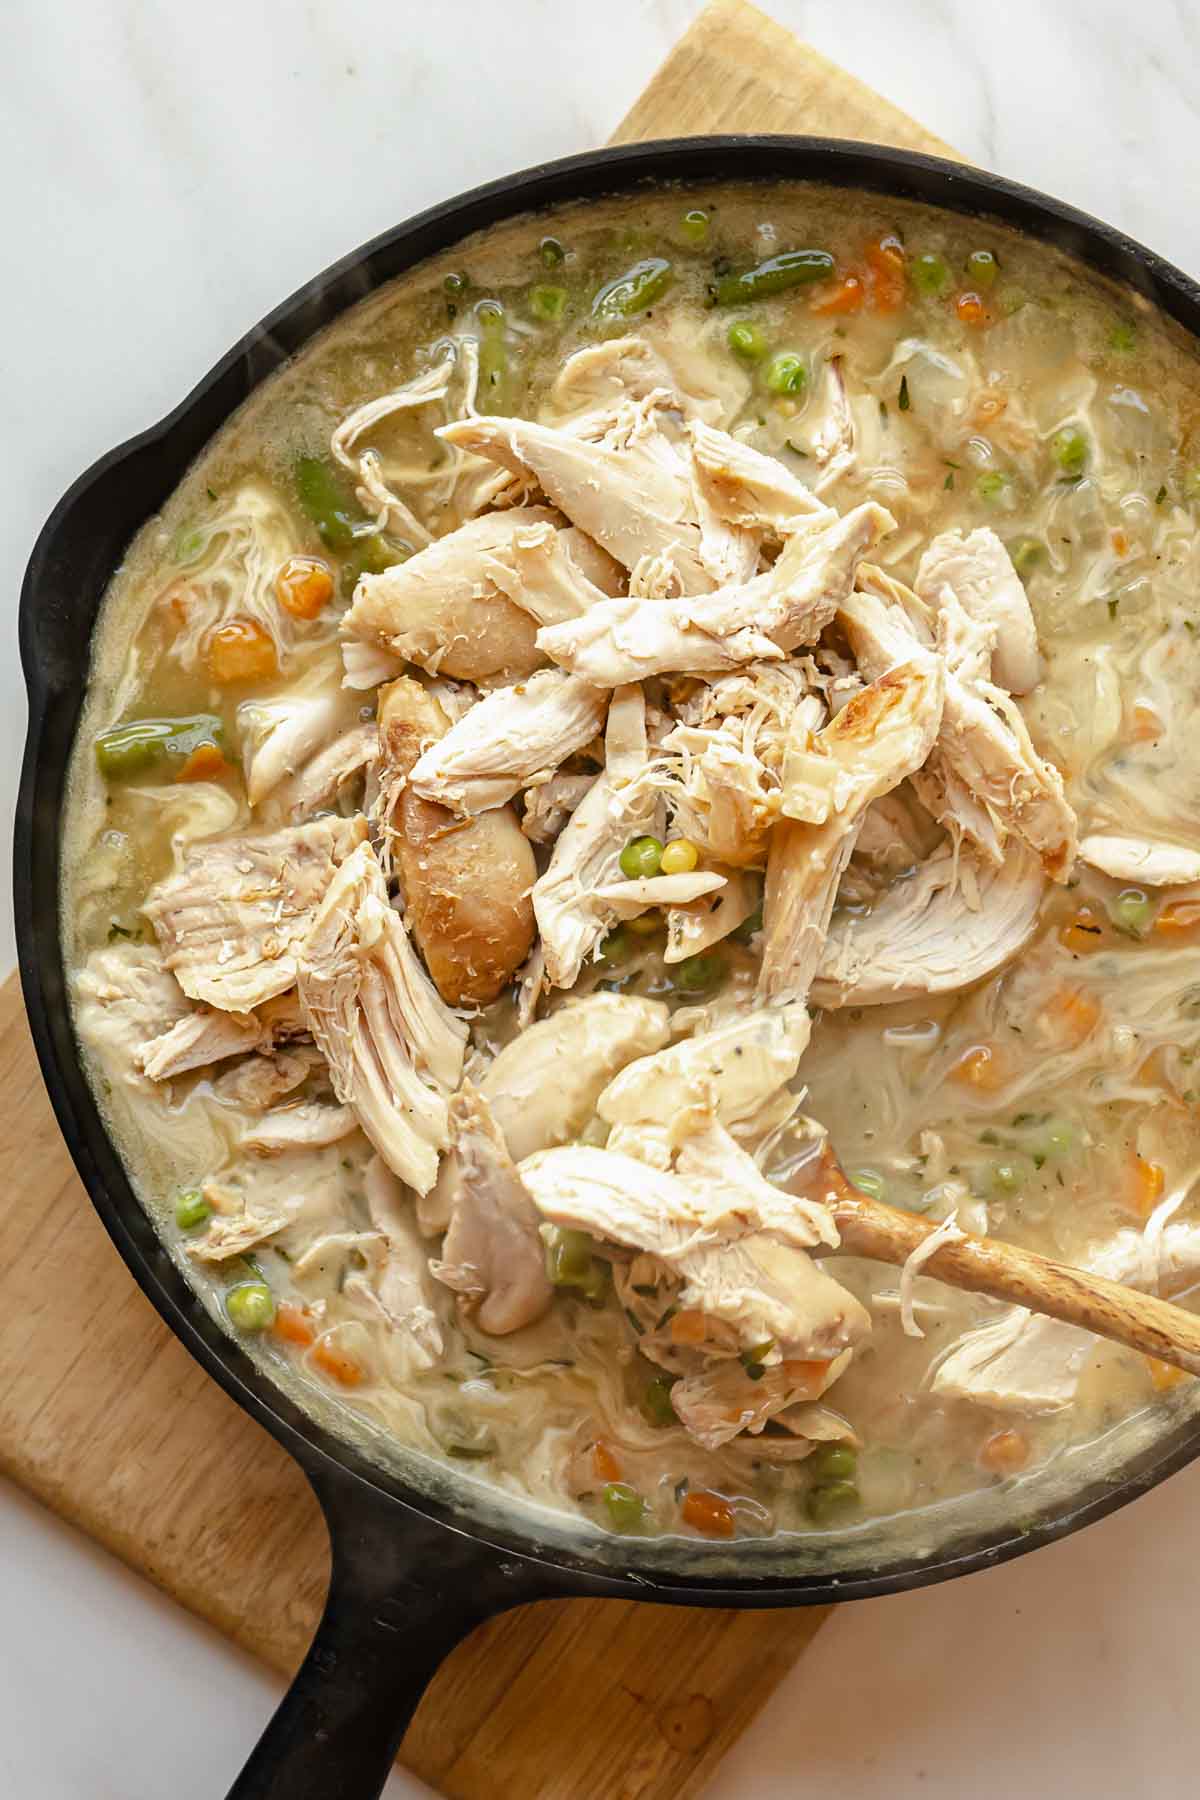 A spoon stirs shredded turkey into the pot pie filling.